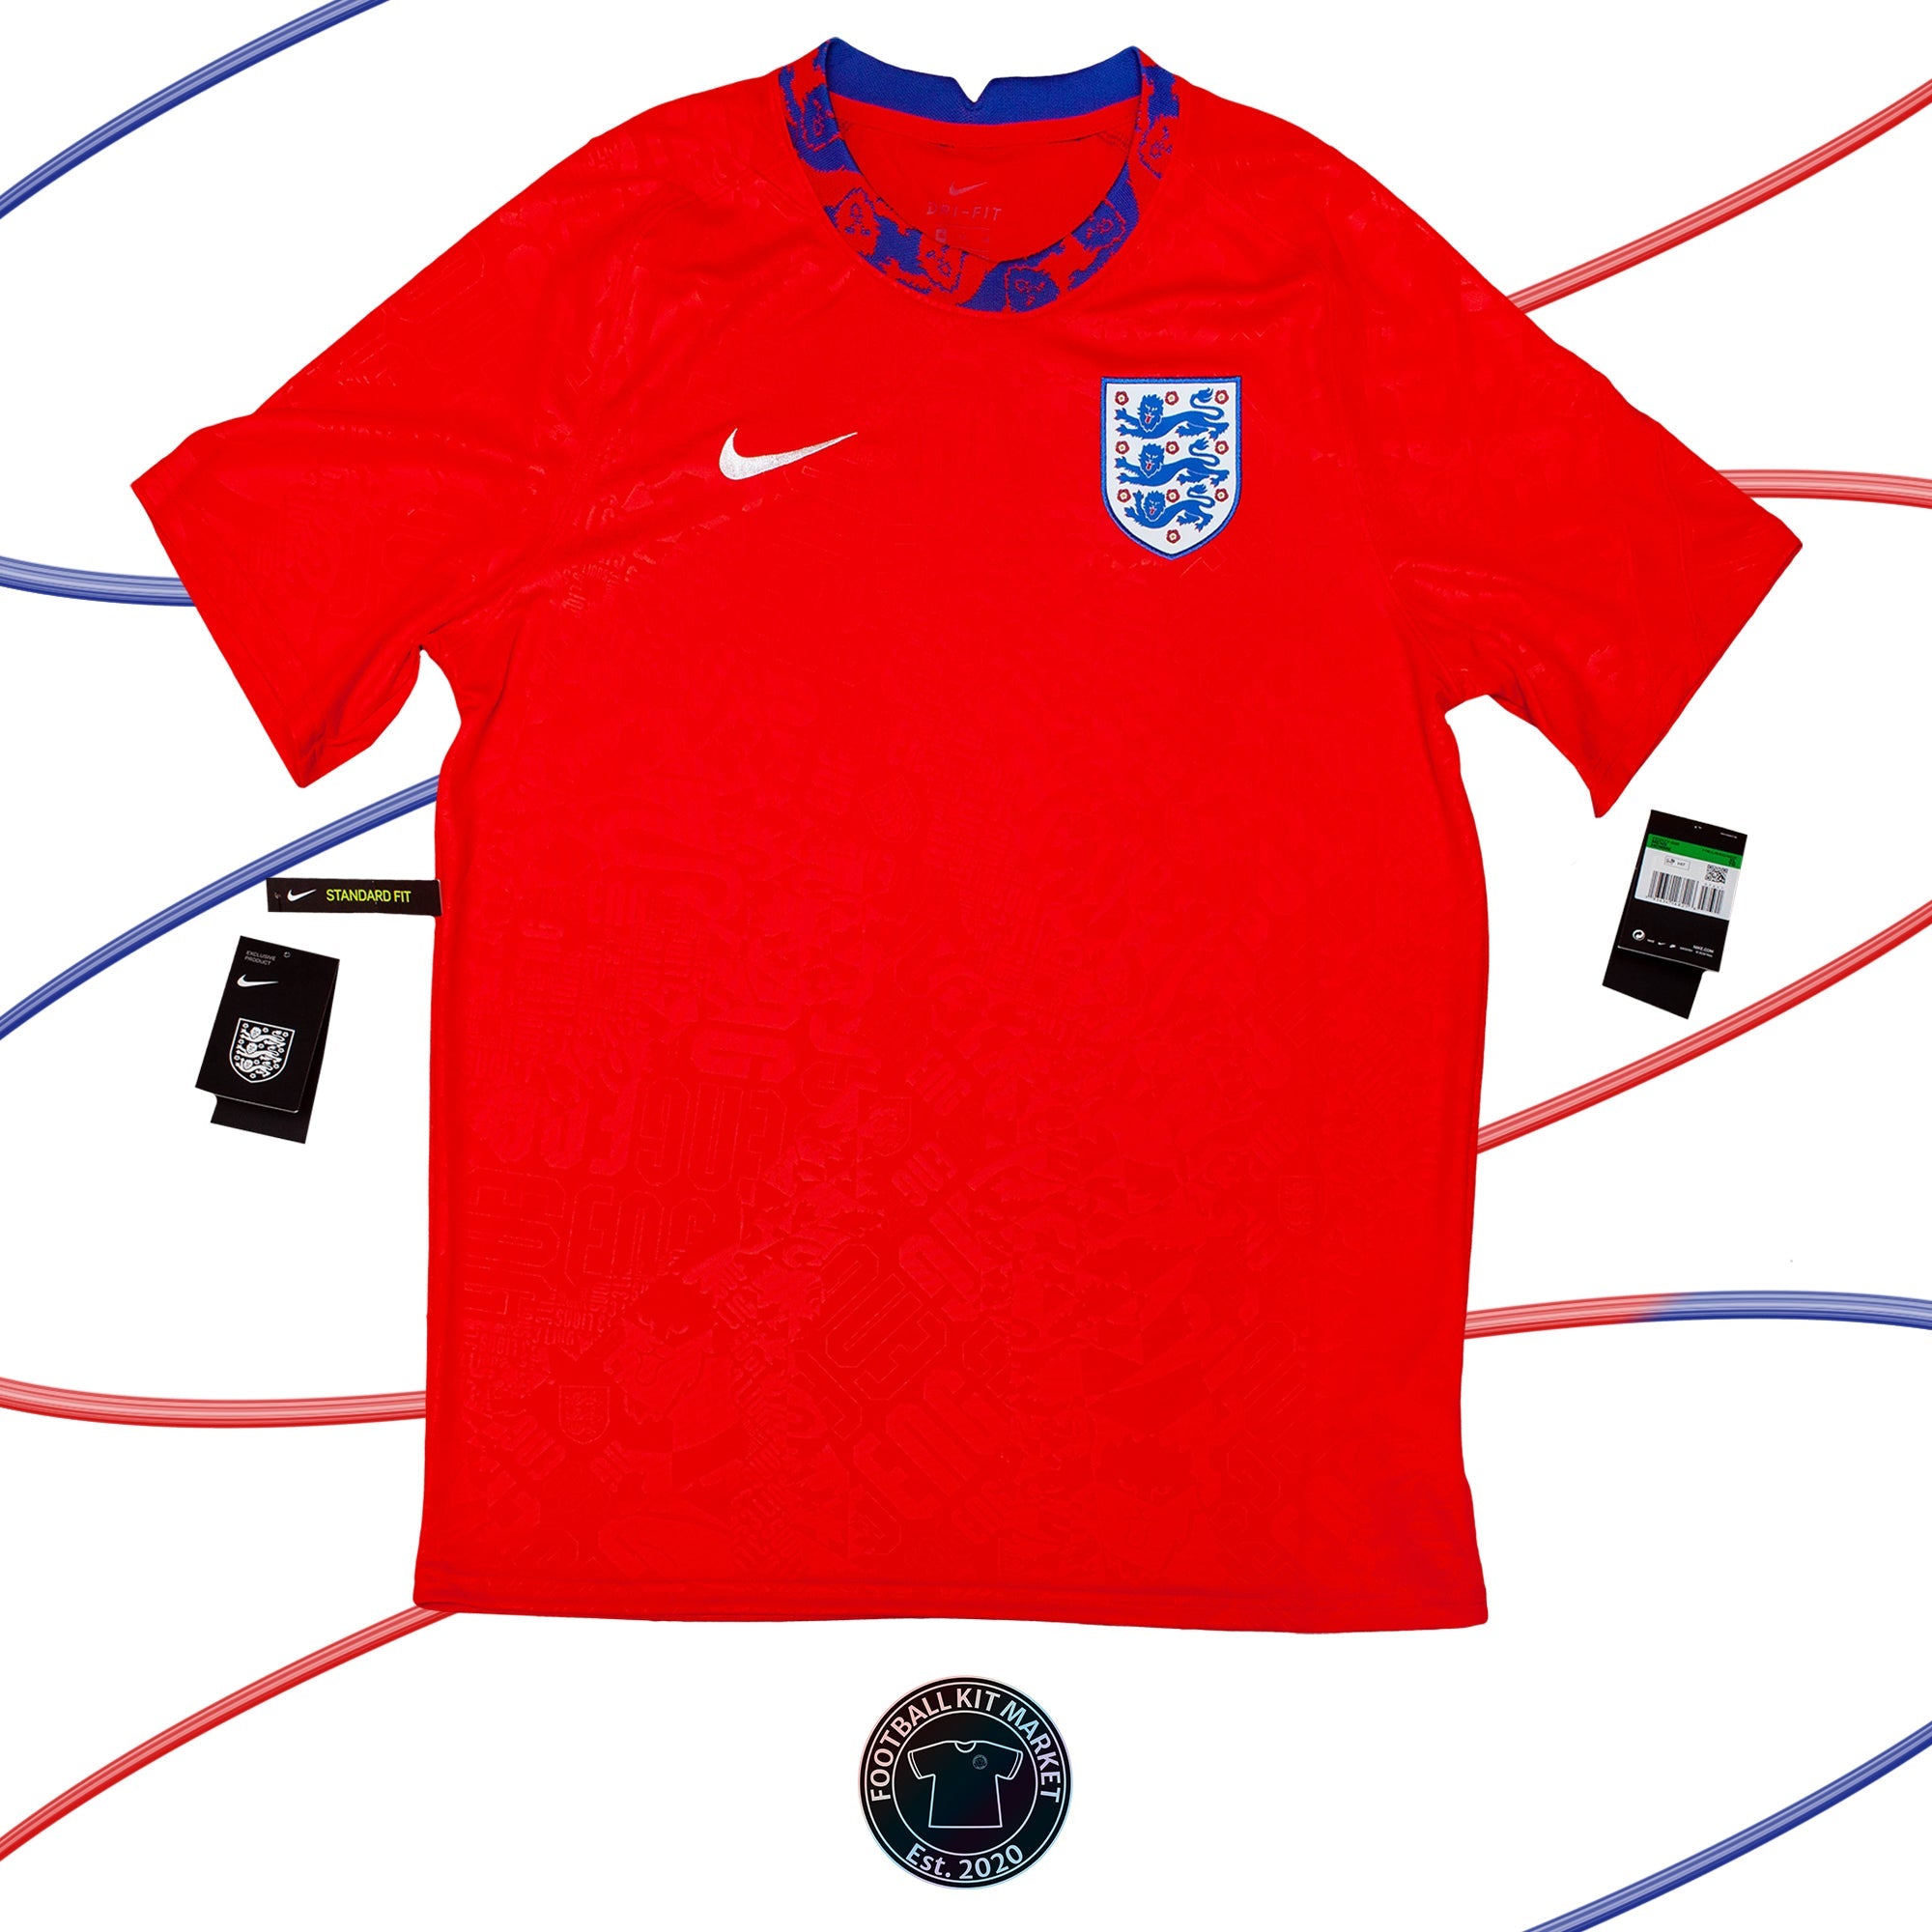 Genuine ENGLAND Pre-Match Shirt (2020) - NIKE (XL) - Product Image from Football Kit Market